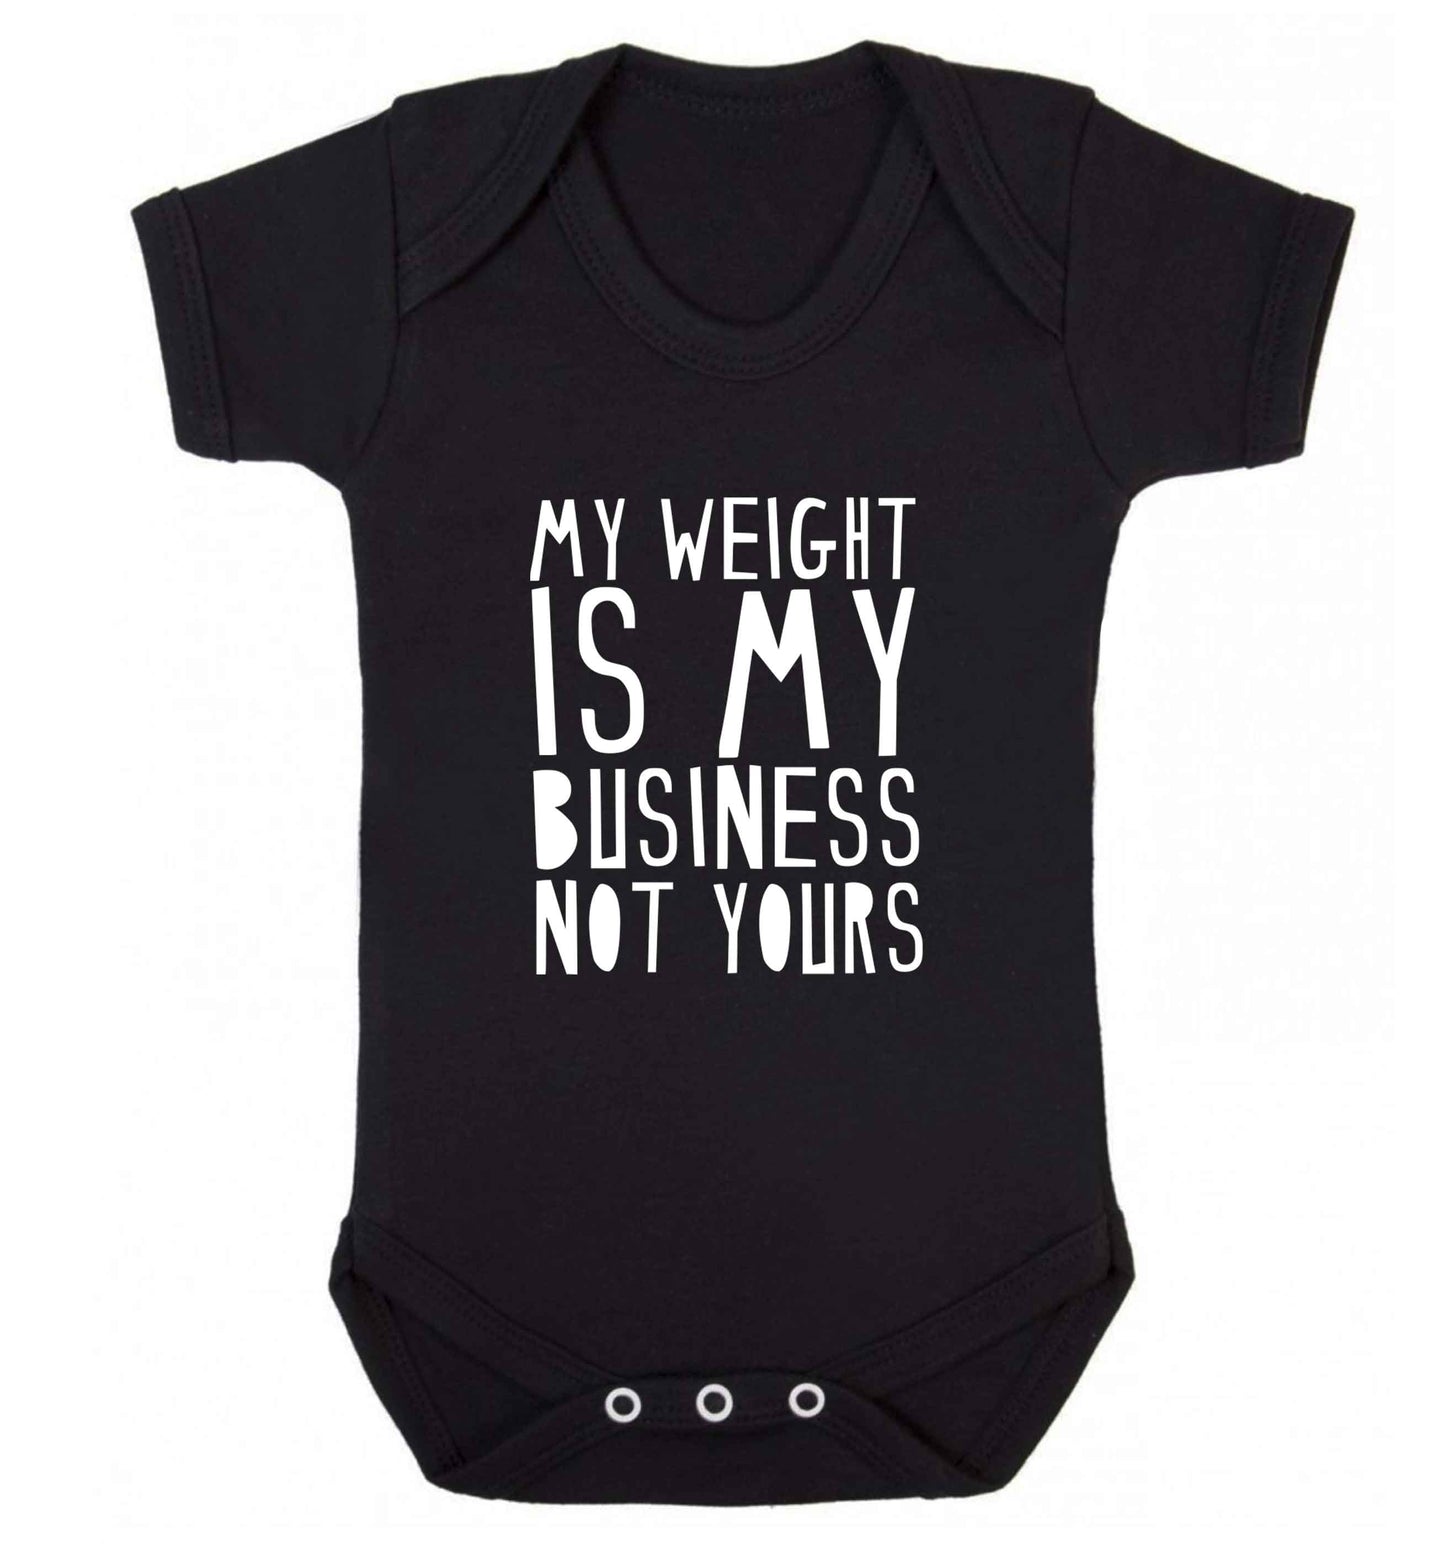 My weight is my business not yours baby vest black 18-24 months